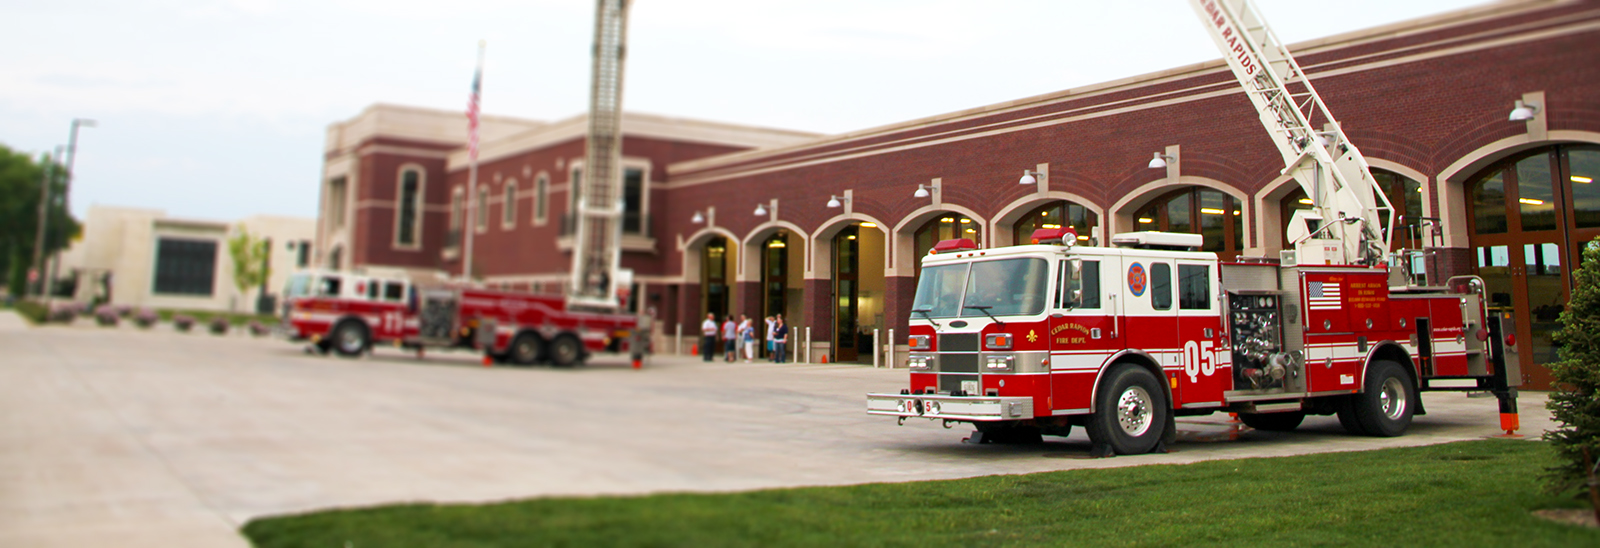 Fire trucks parked outside of the fire station.